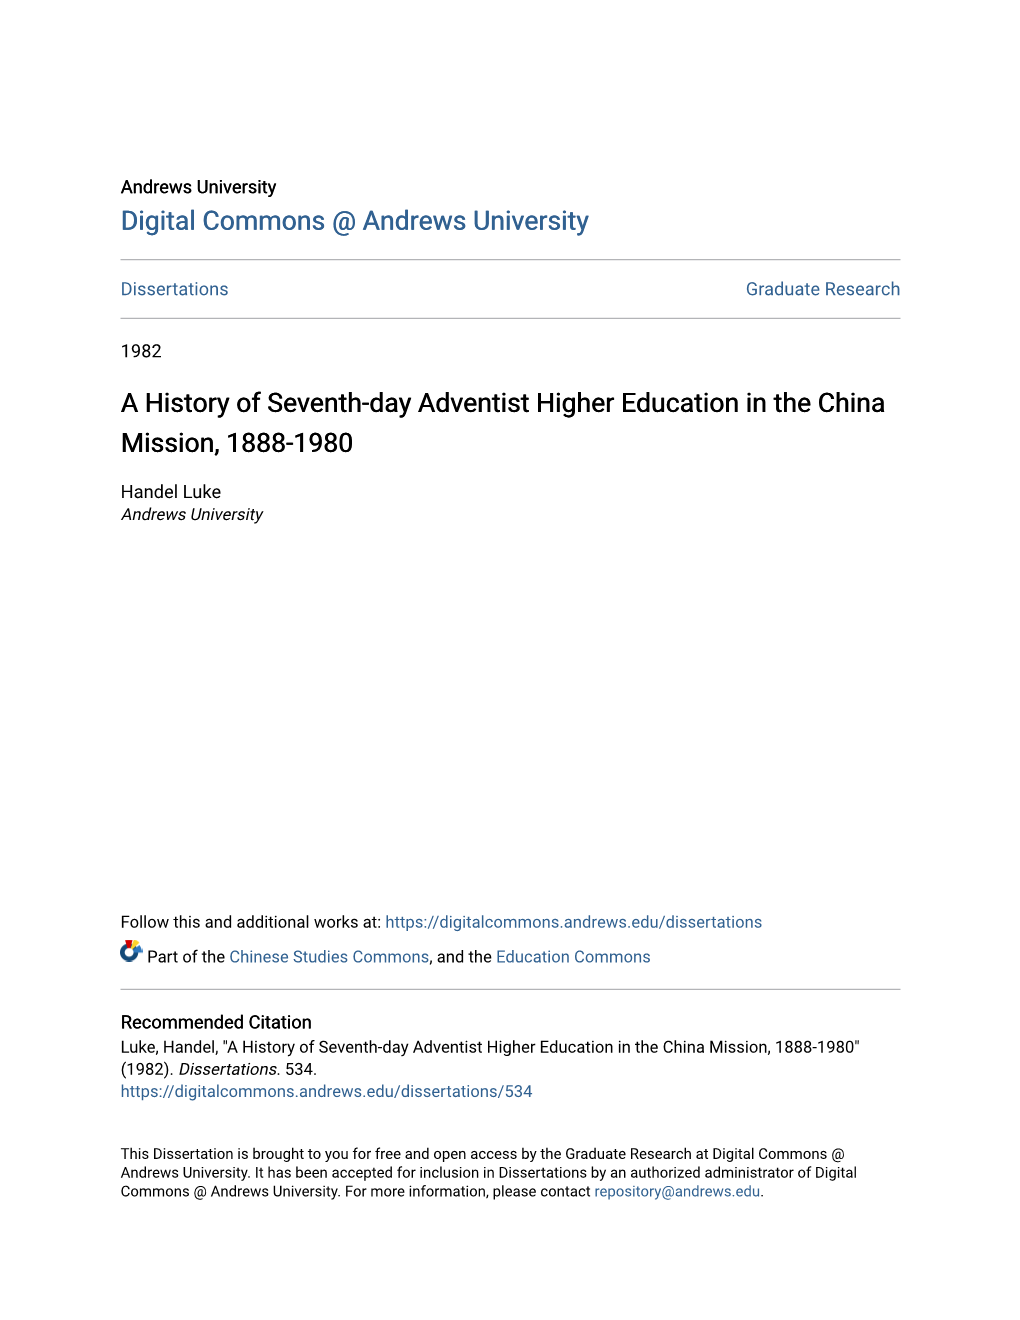 A History of Seventh-Day Adventist Higher Education in the China Mission, 1888-1980